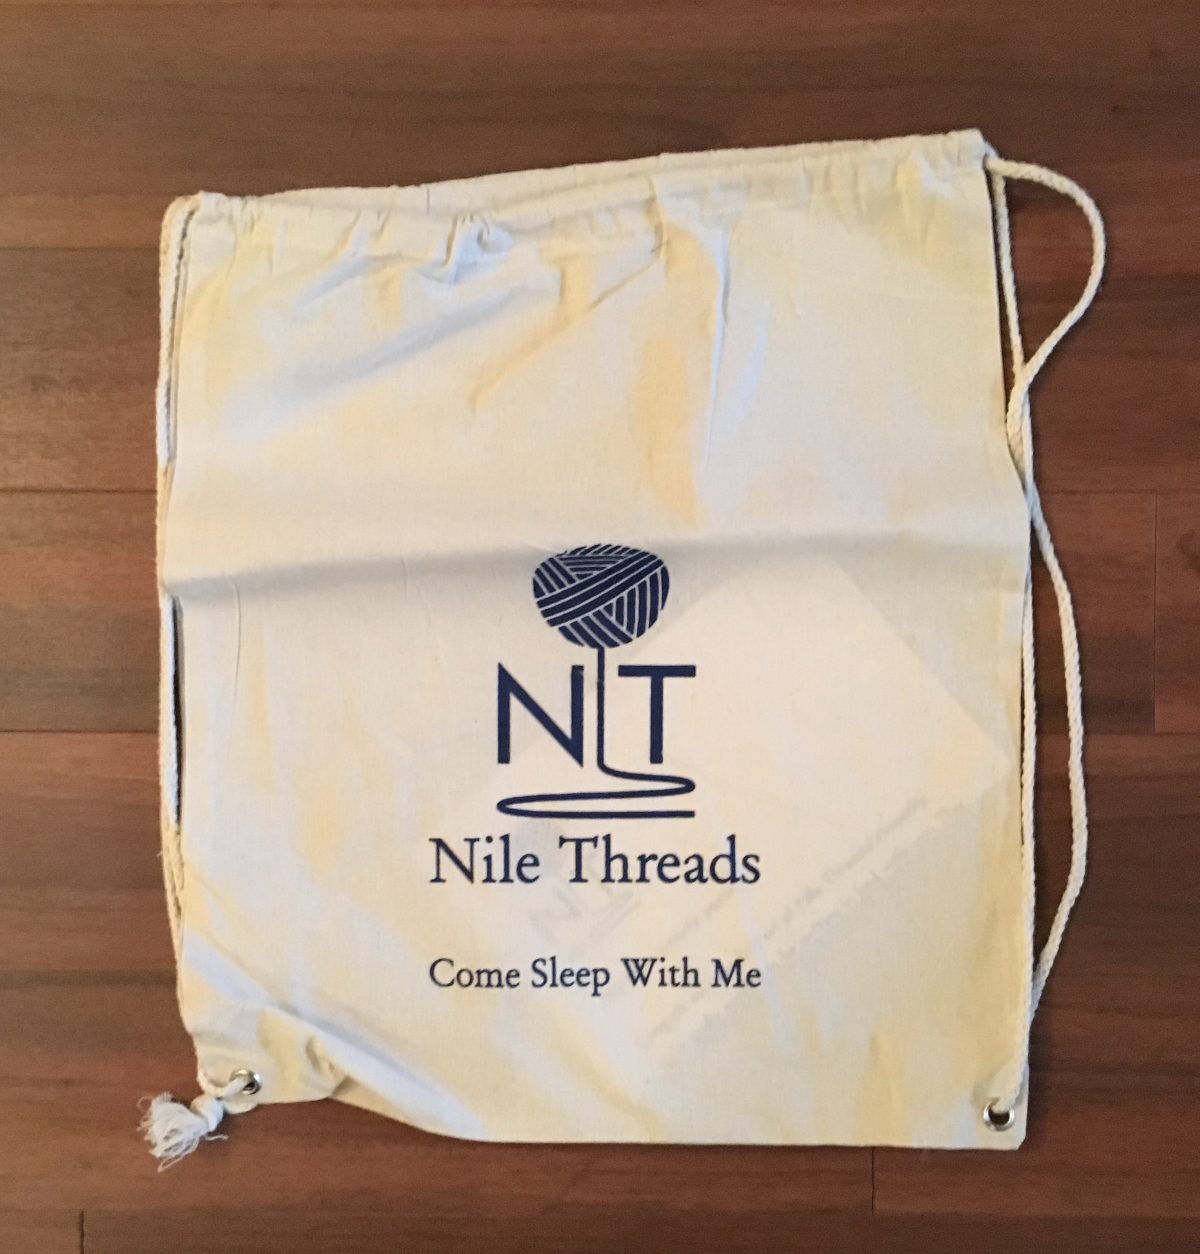 Nile Threads Offers a New Path to a Great Night of Sleep